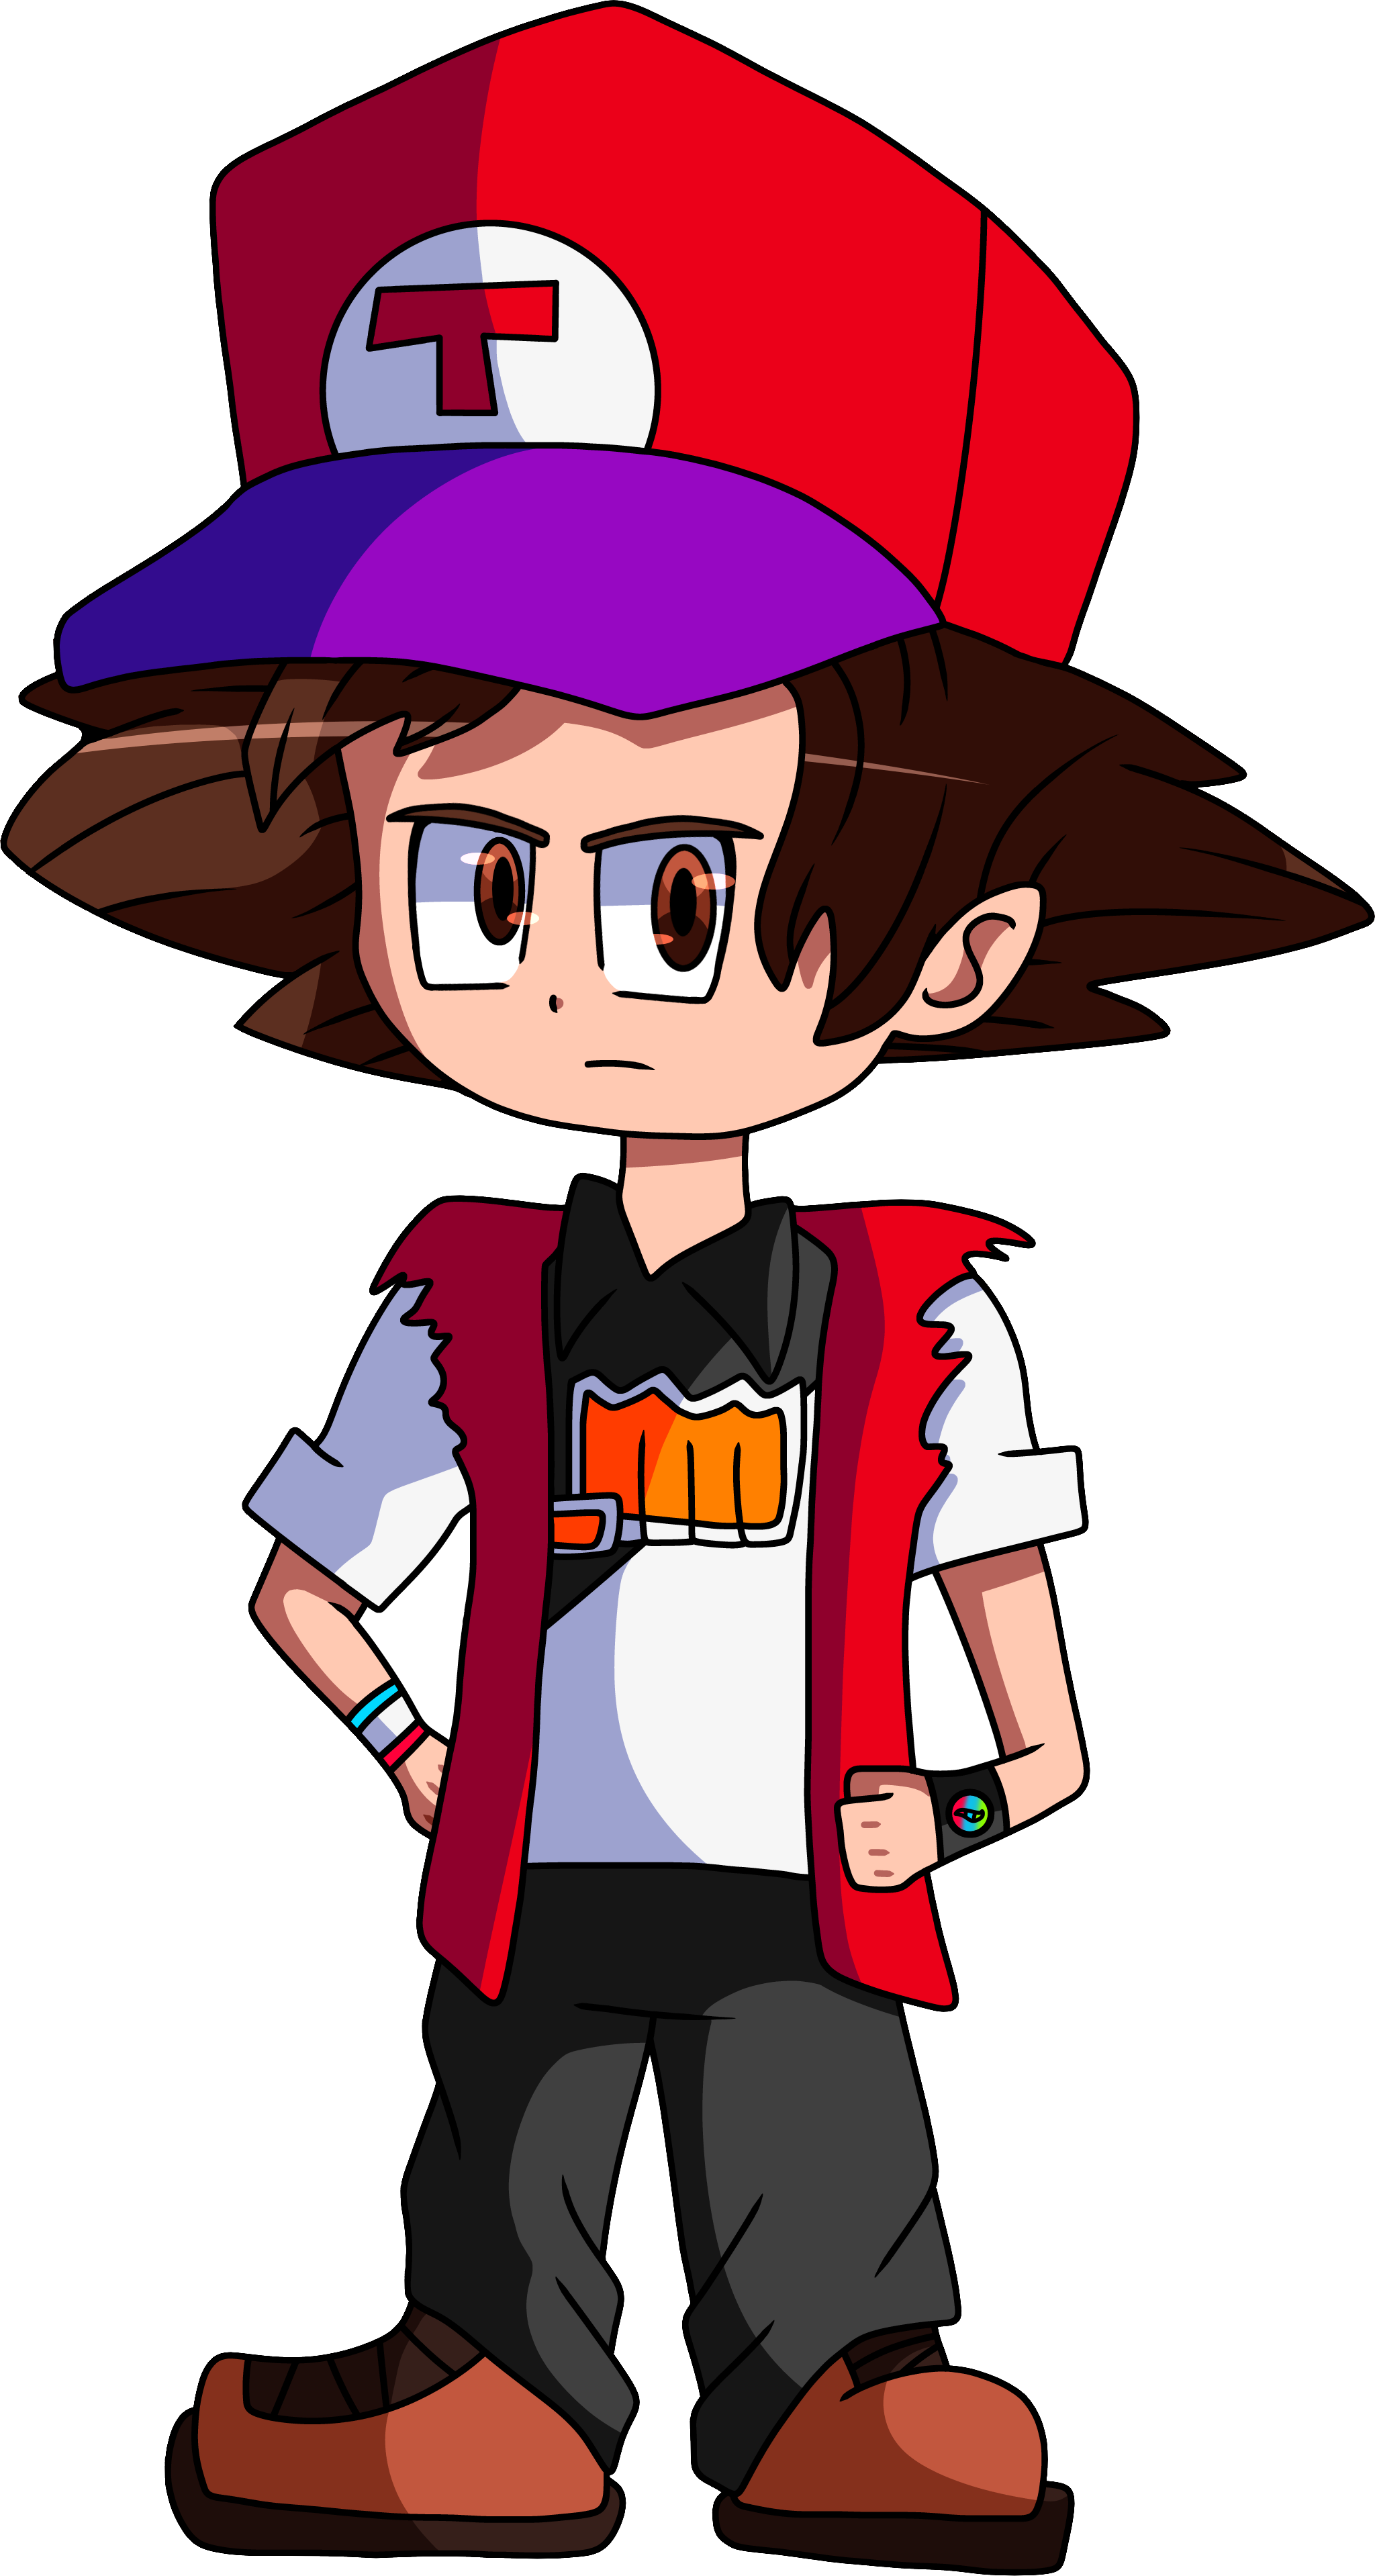 Pokemon Trainer Red (Anime Style) by ryanly64 on DeviantArt